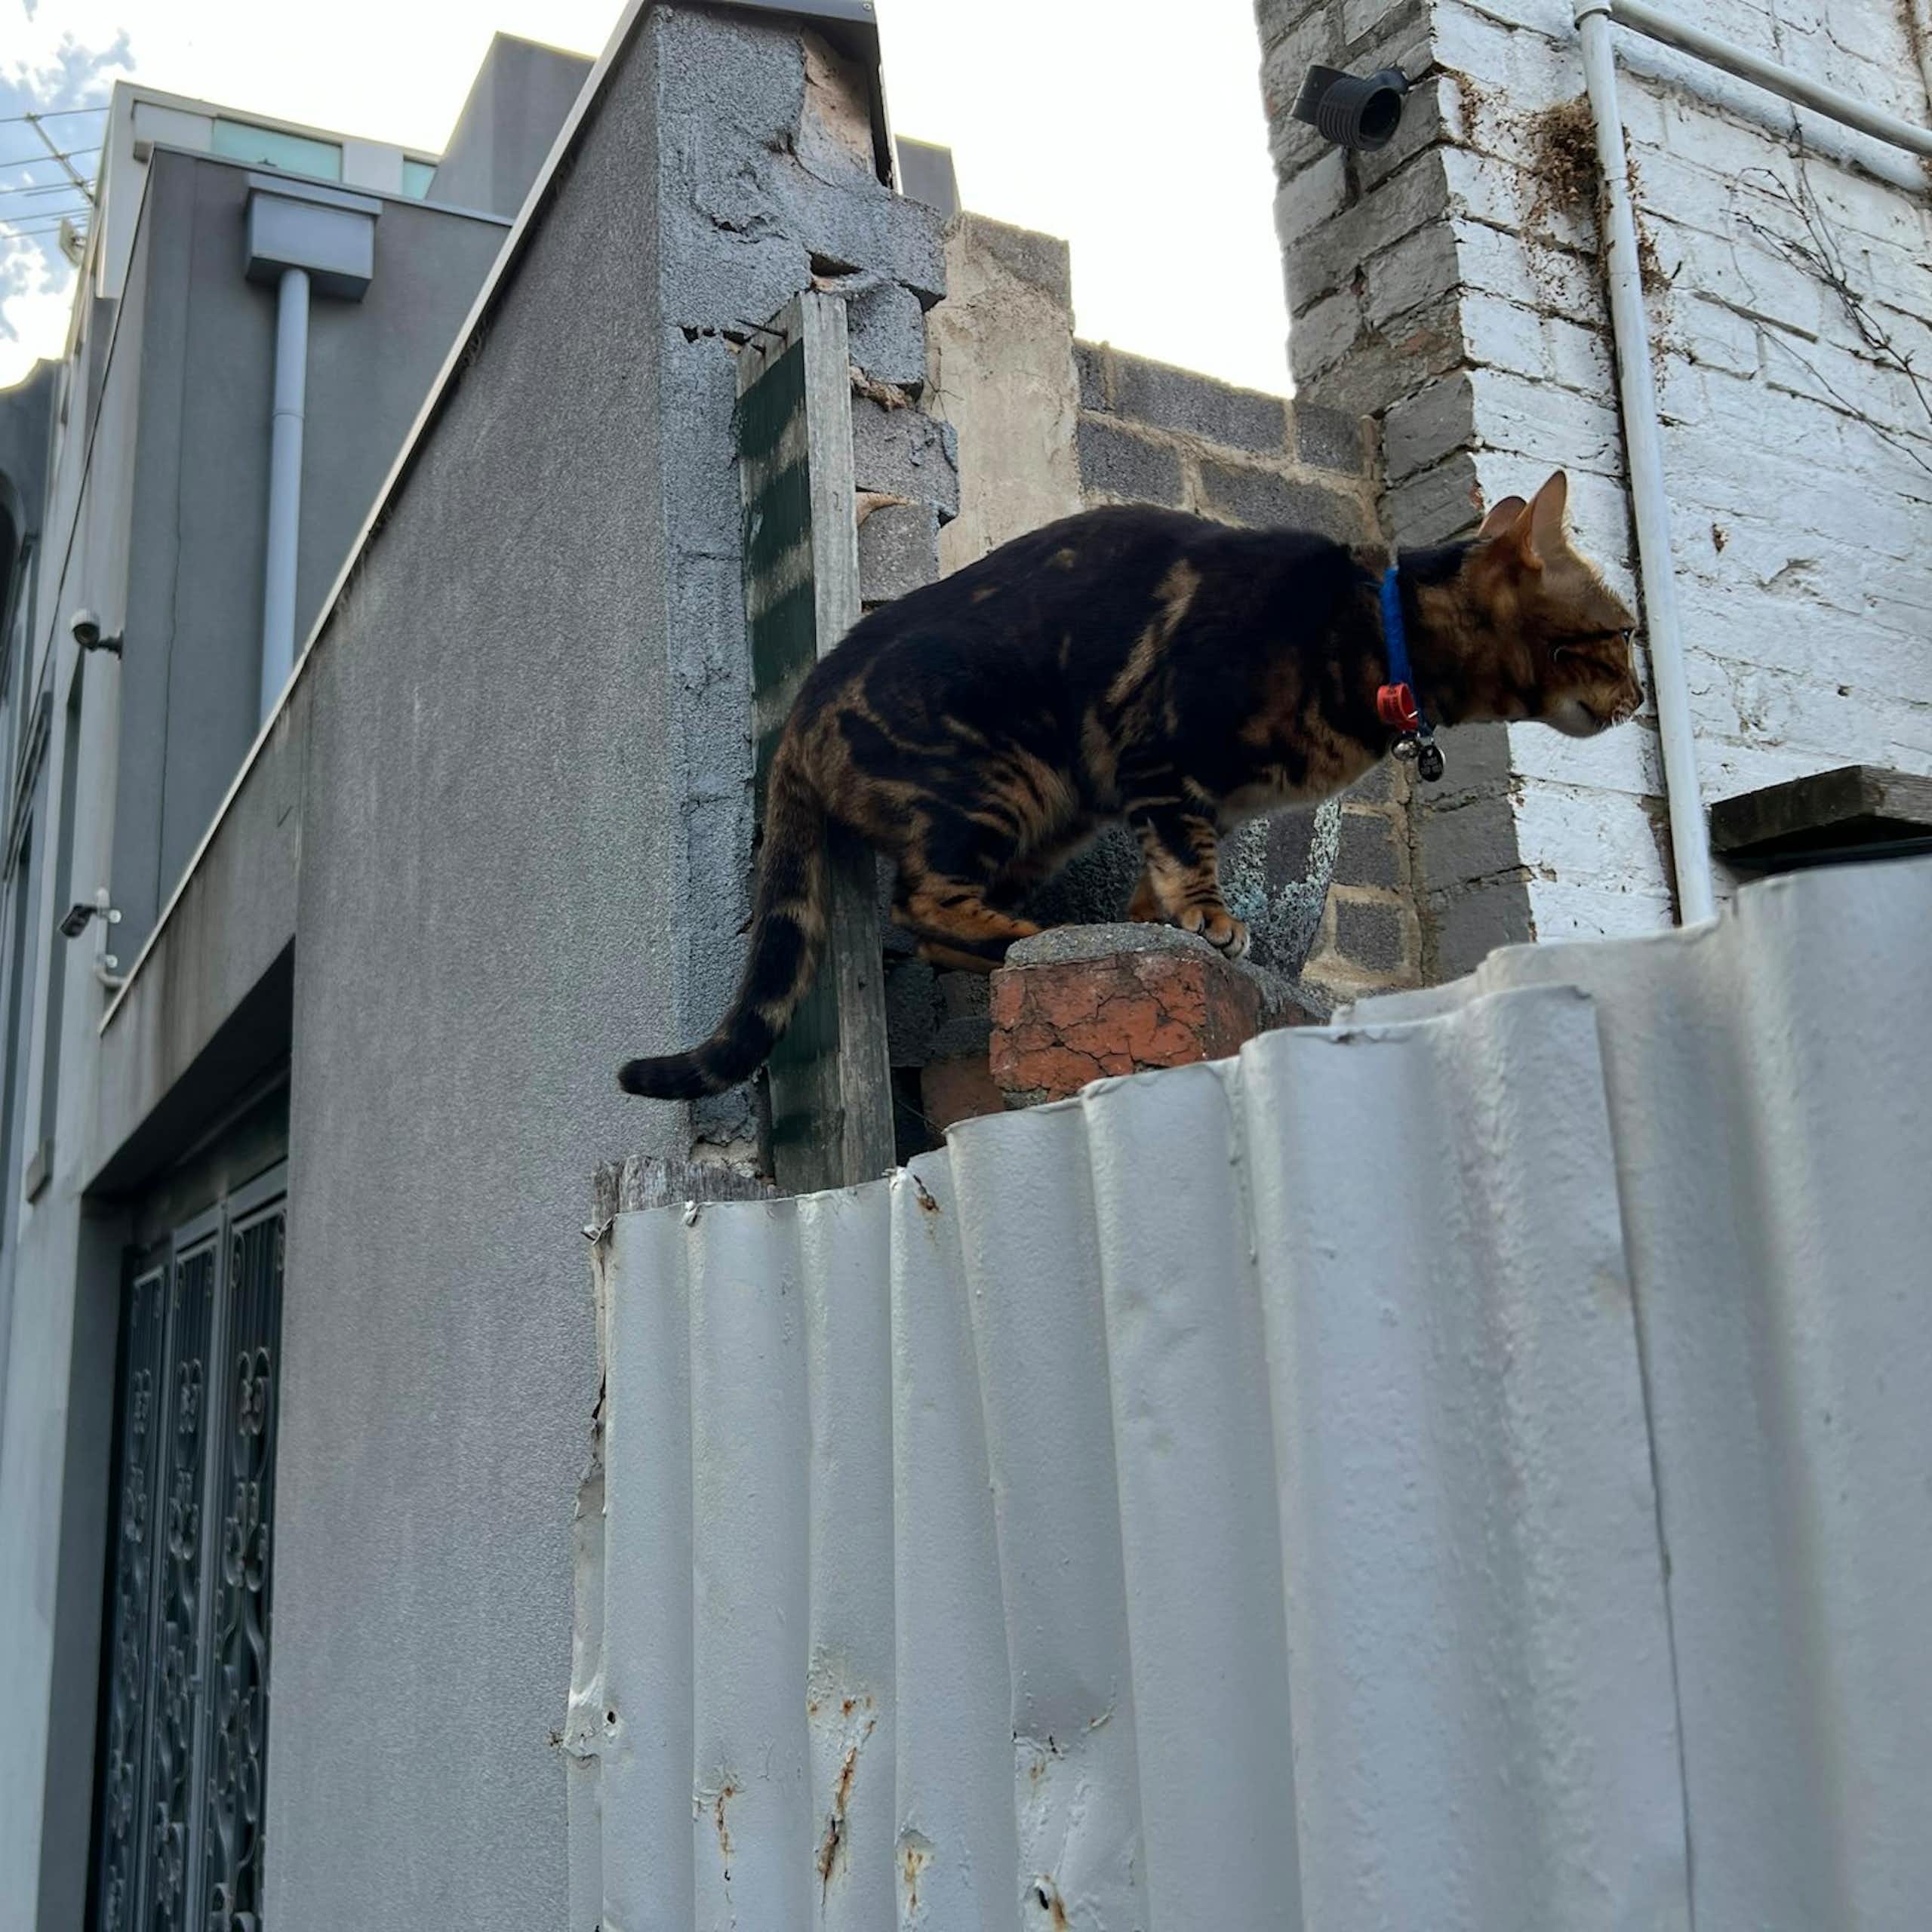 A roaming cat with a collar climbs over a fence